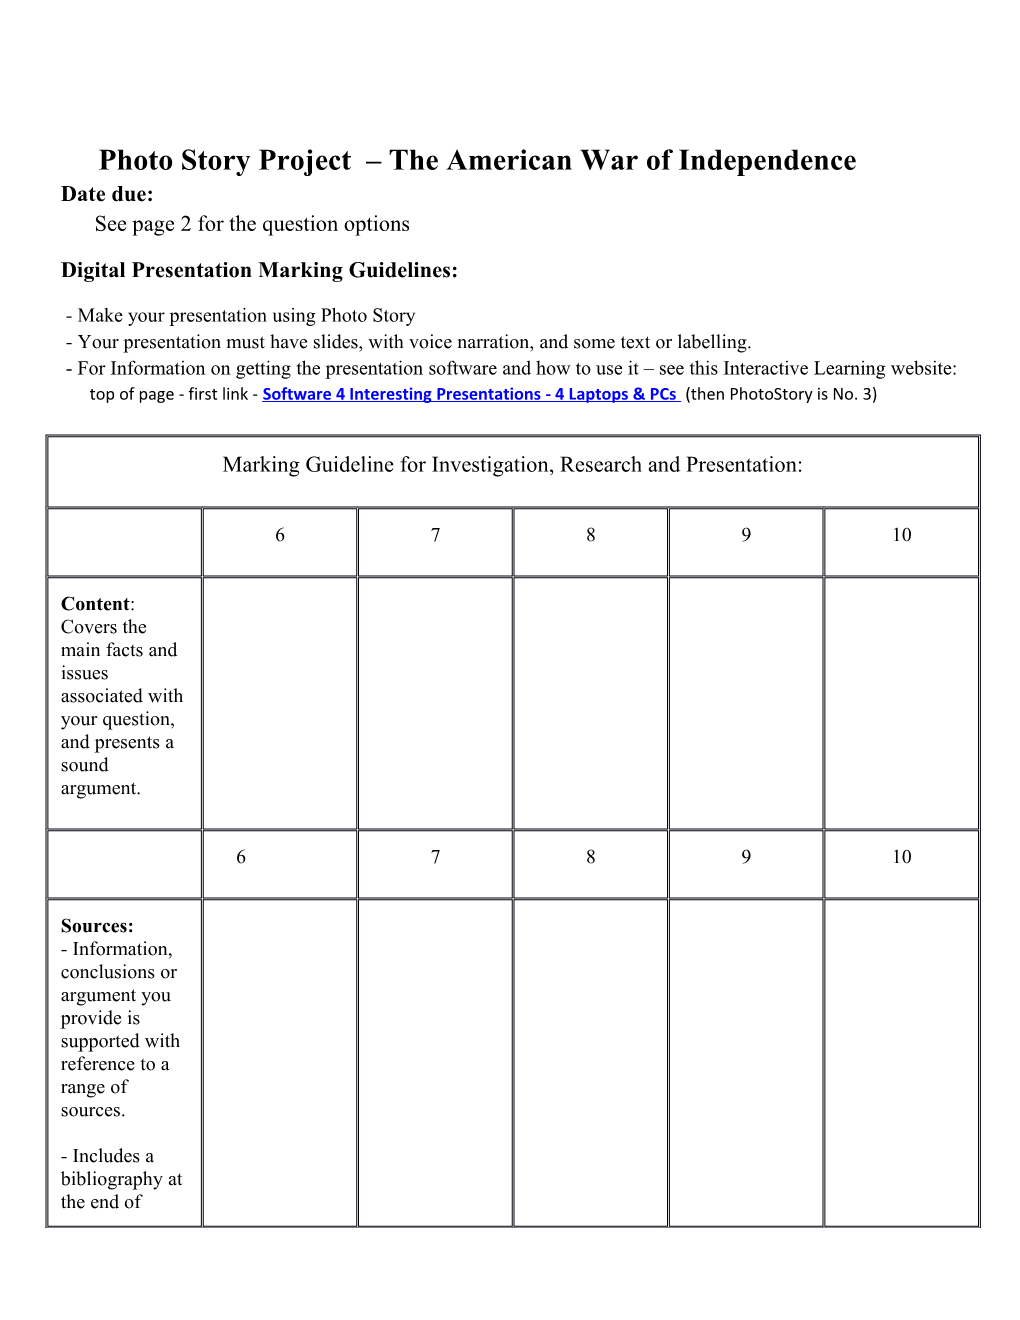 The American War of Independence- Photo Story Question Options